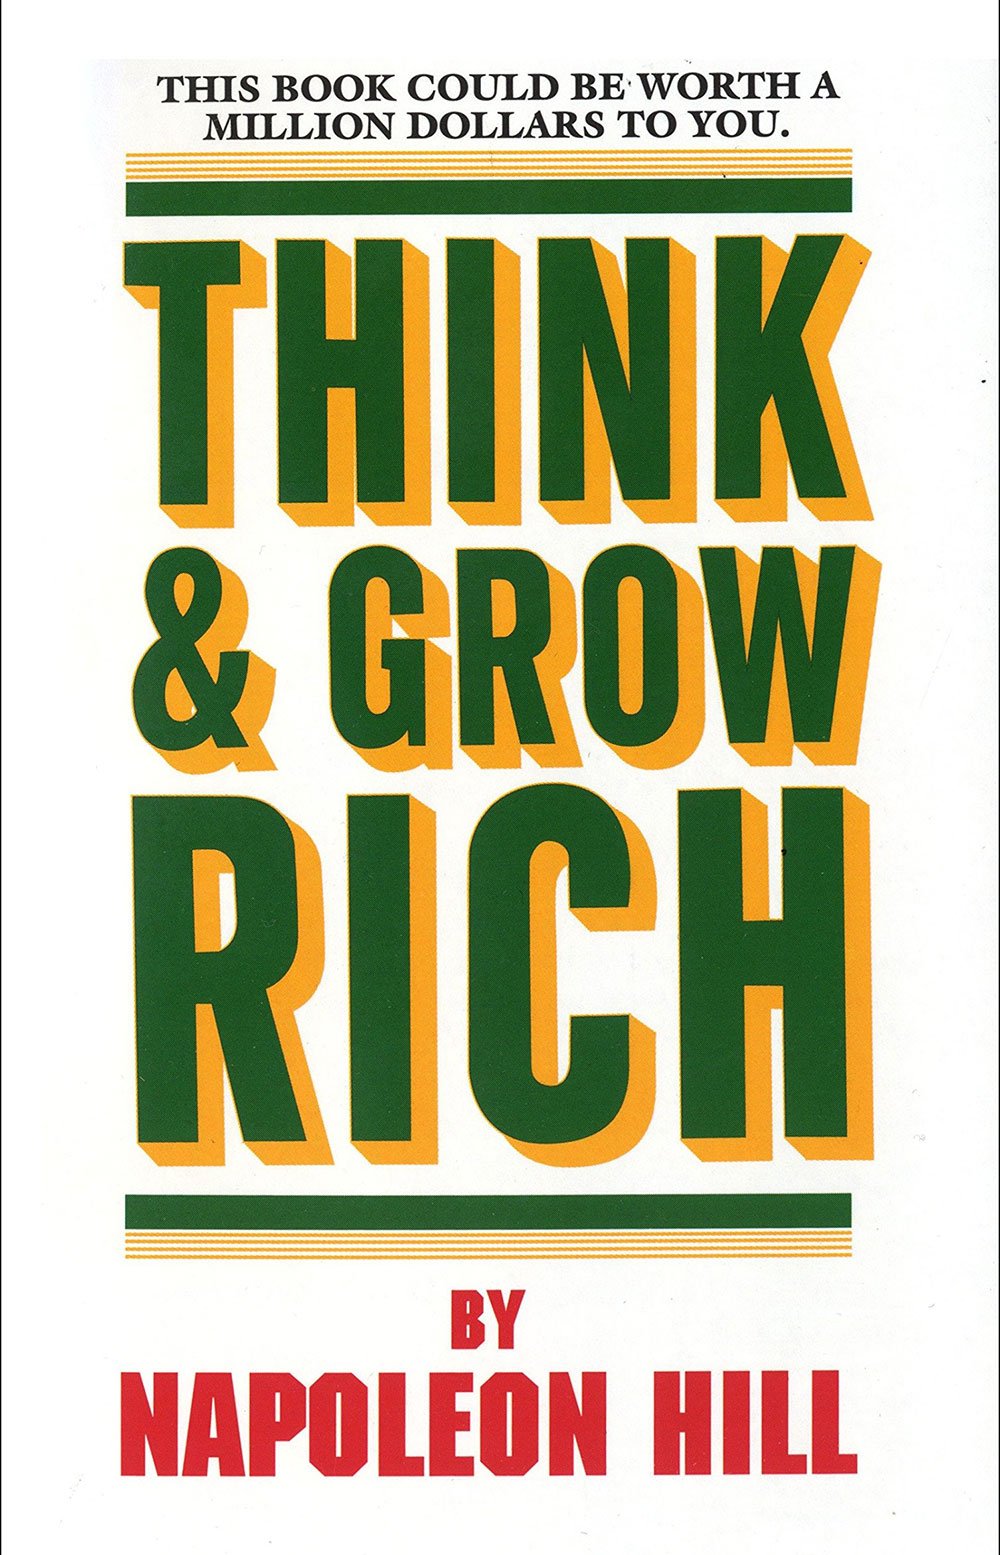 //demetriscurry.com/wp-content/uploads/2019/03/Think-_-Grow-Rich-by-Napoleon-Hill-1.jpg